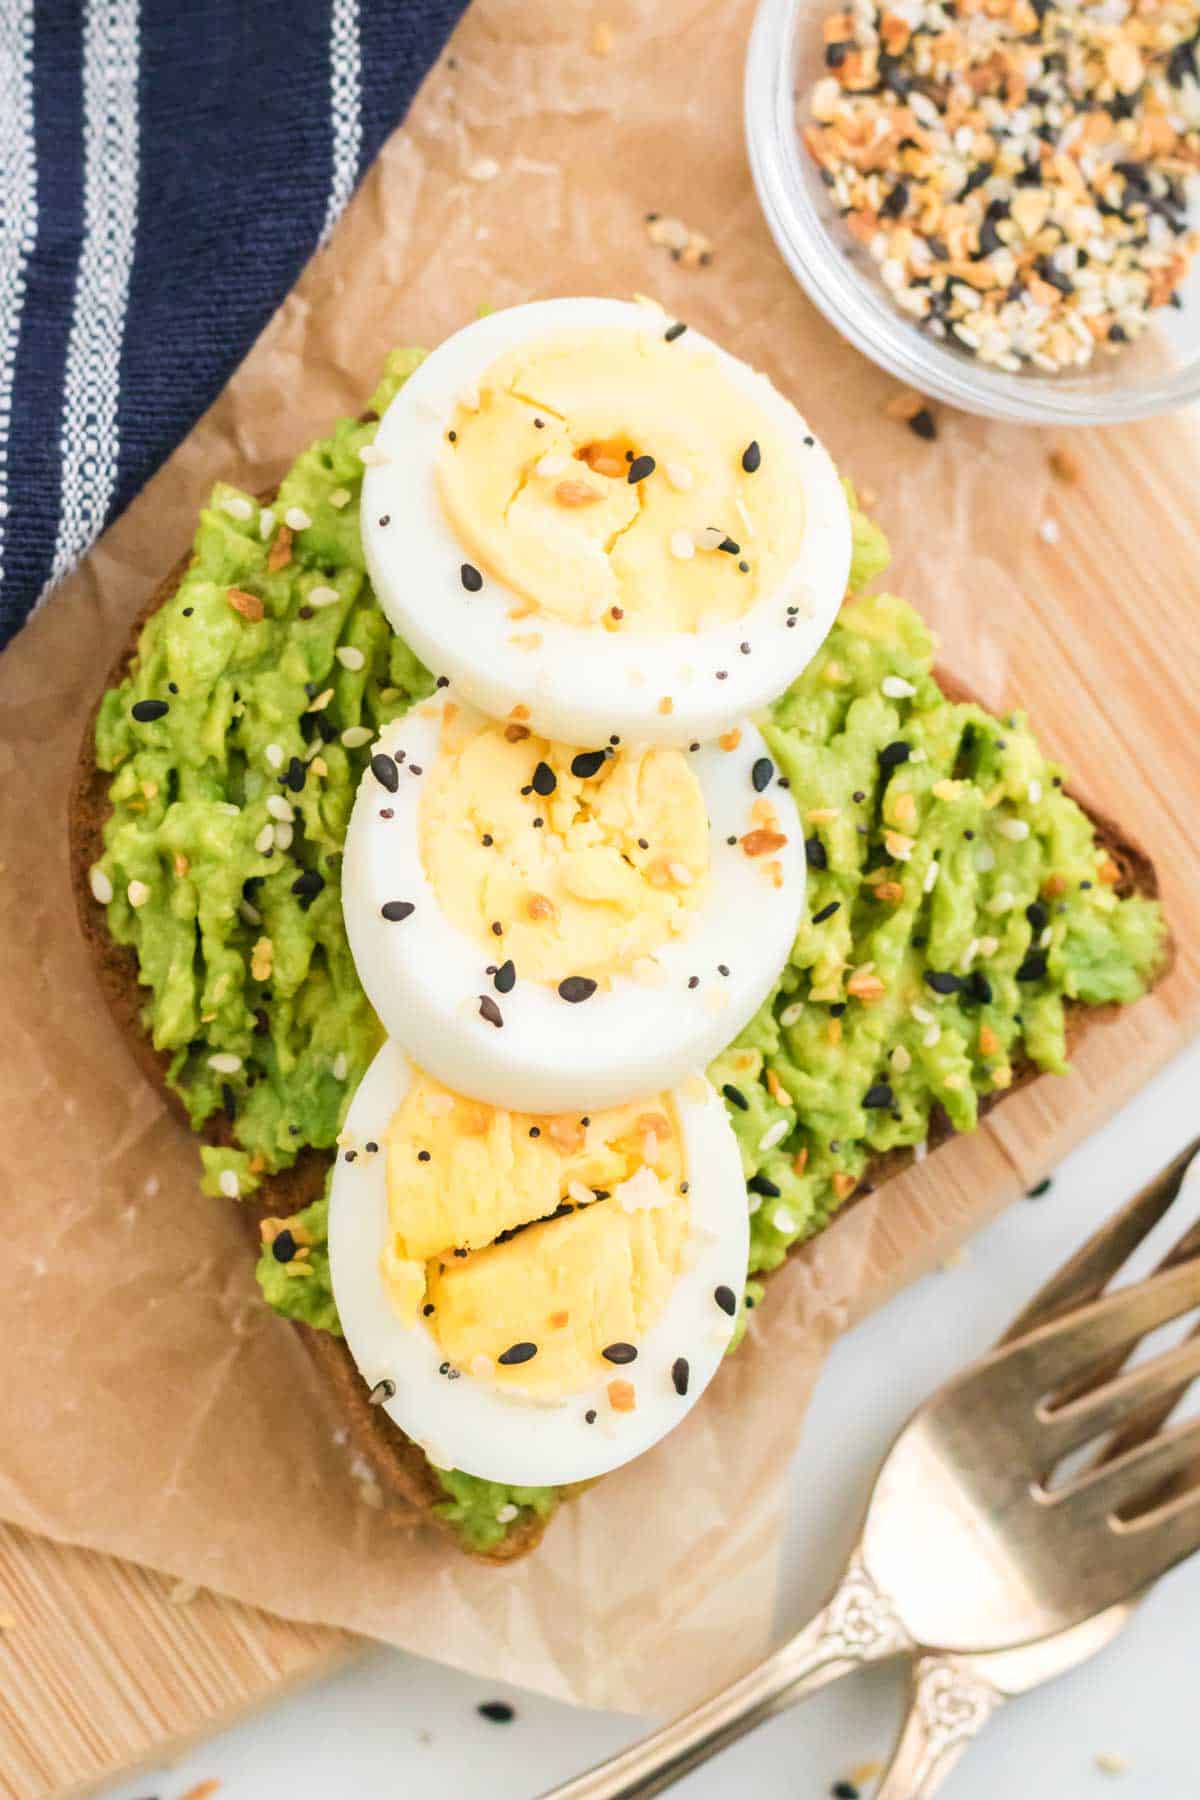 Avocado toast topped with sliced eggs and seasoning next to a fork.